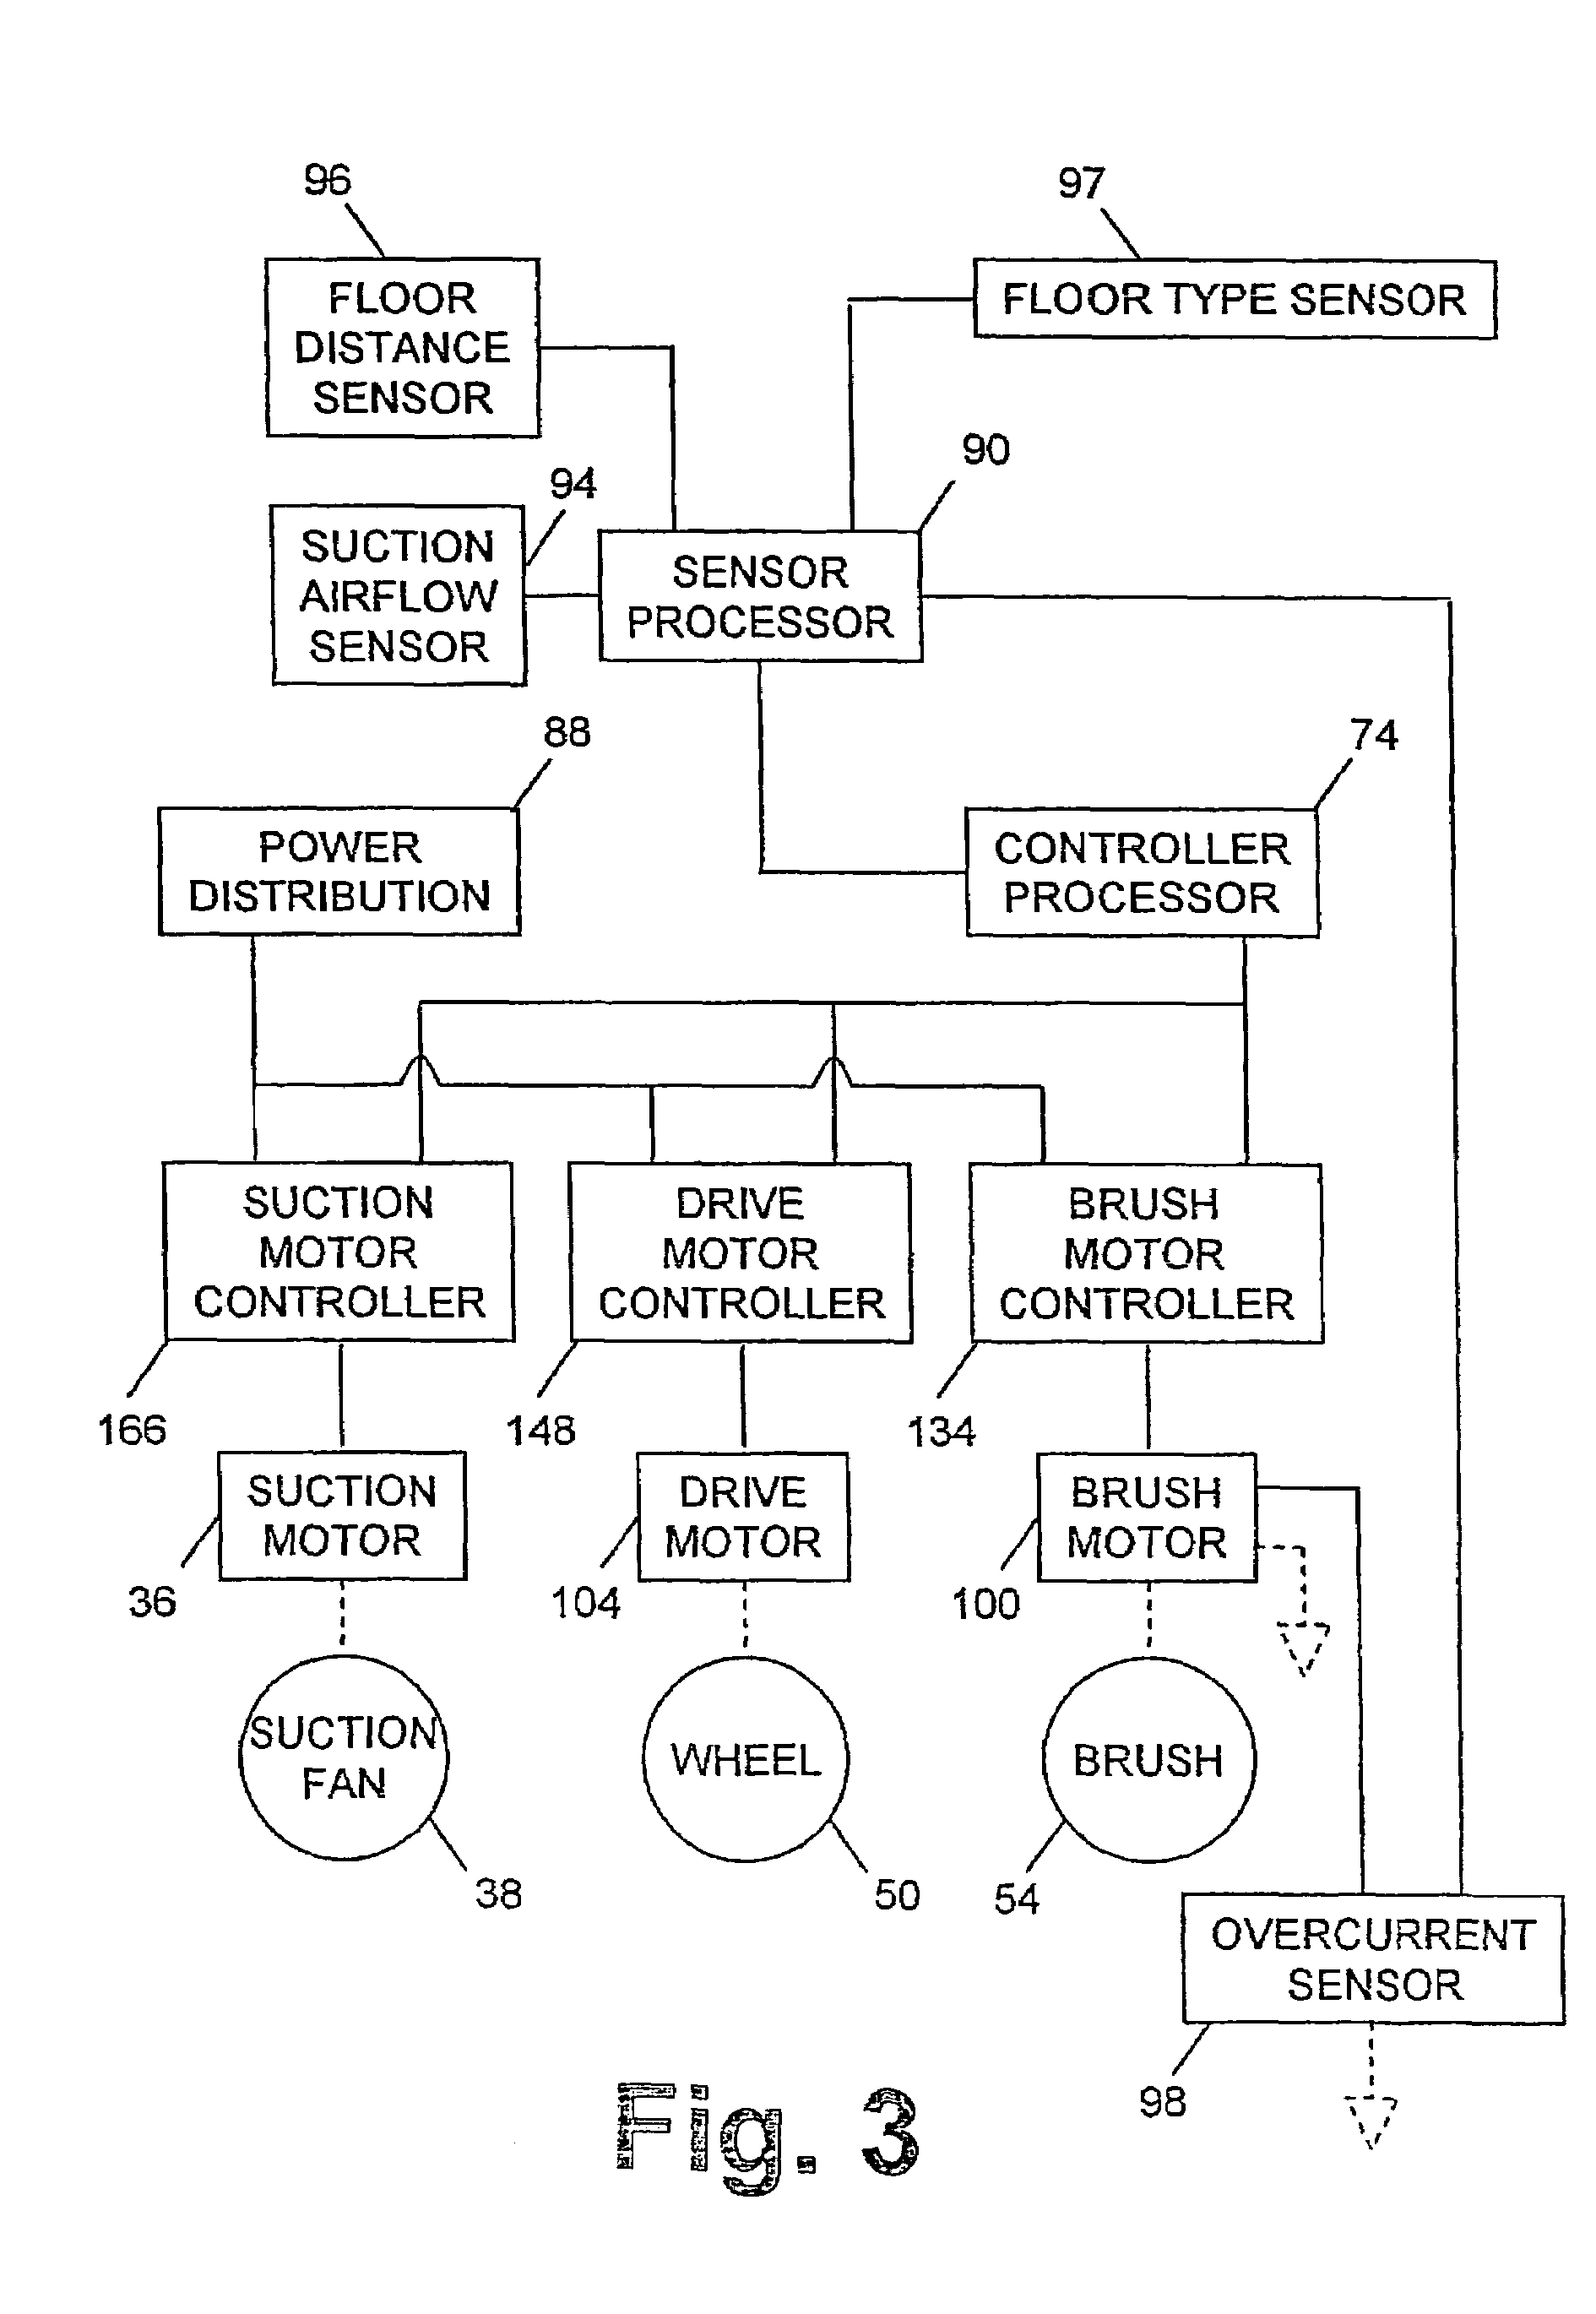 Sensors and associated methods for controlling a vacuum cleaner